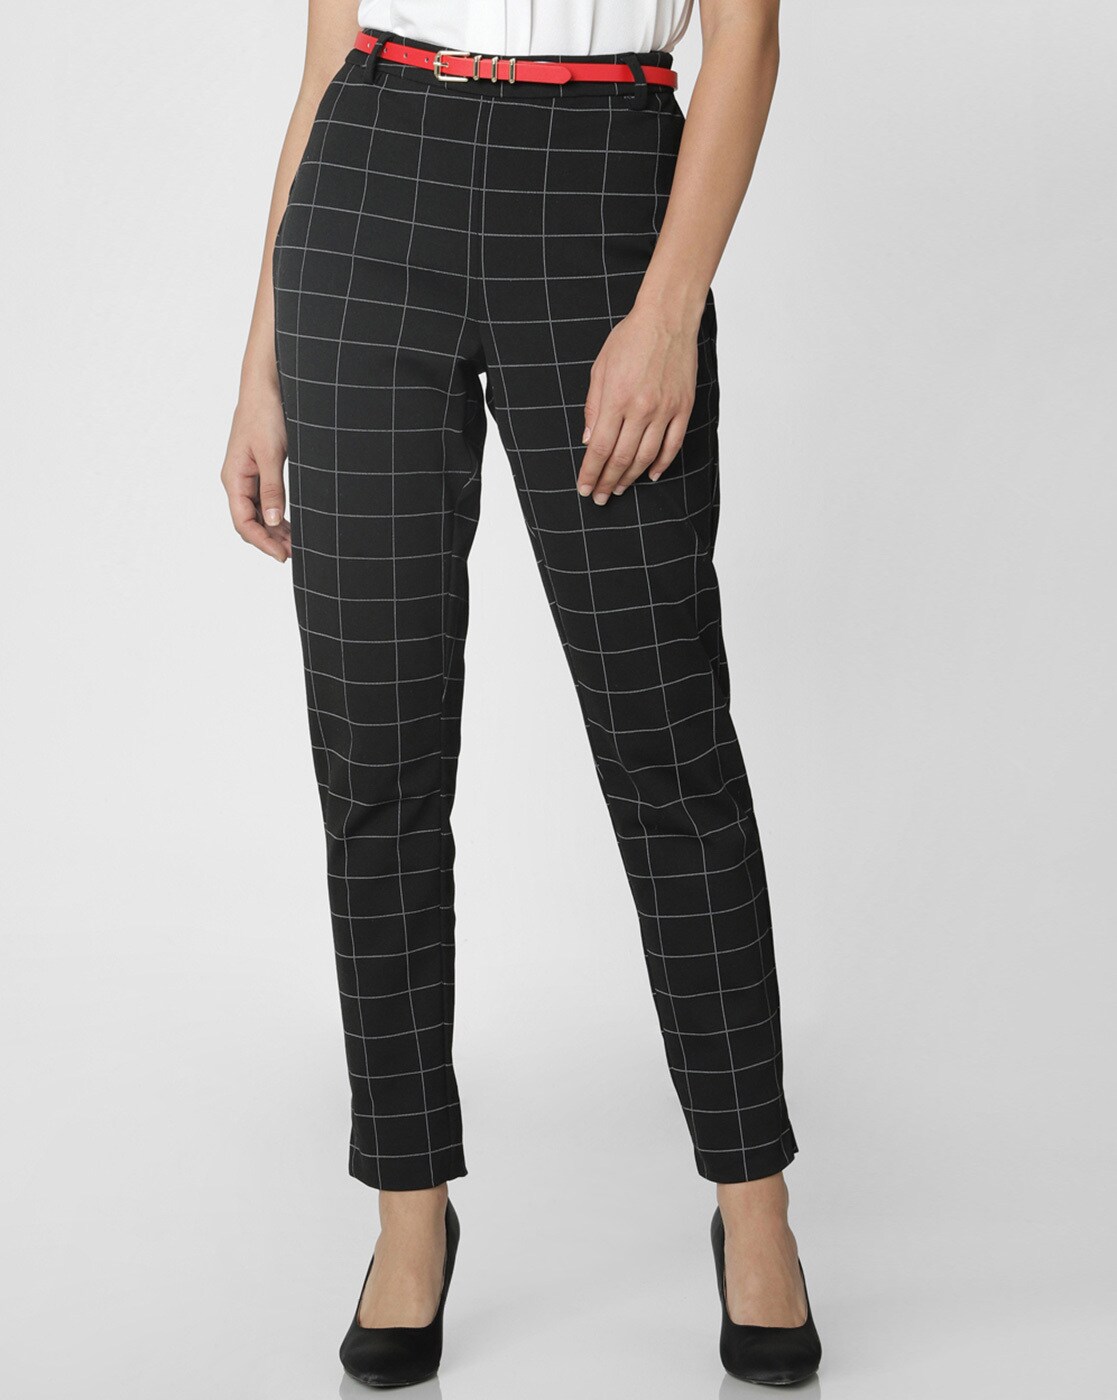 How to Wear Plaid / Checkered Pants? | The Dots